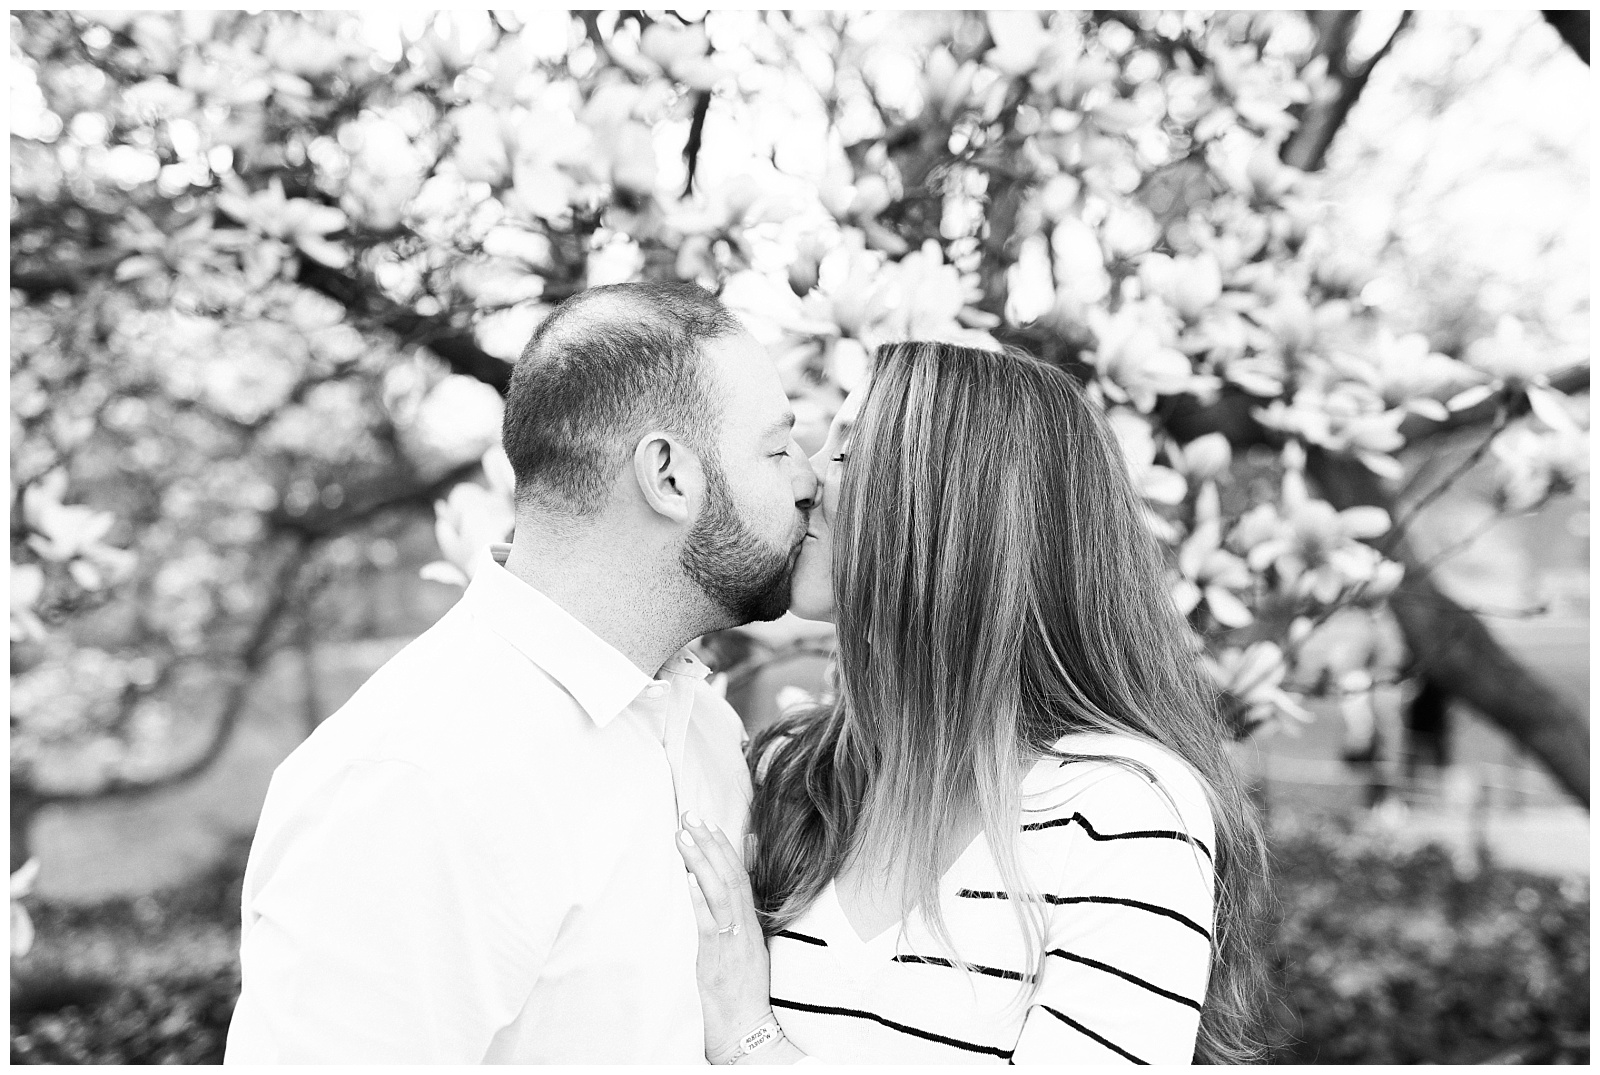 Central Park, NYC engagement session, springtime, wedding photographer, New York, black and white, blooming